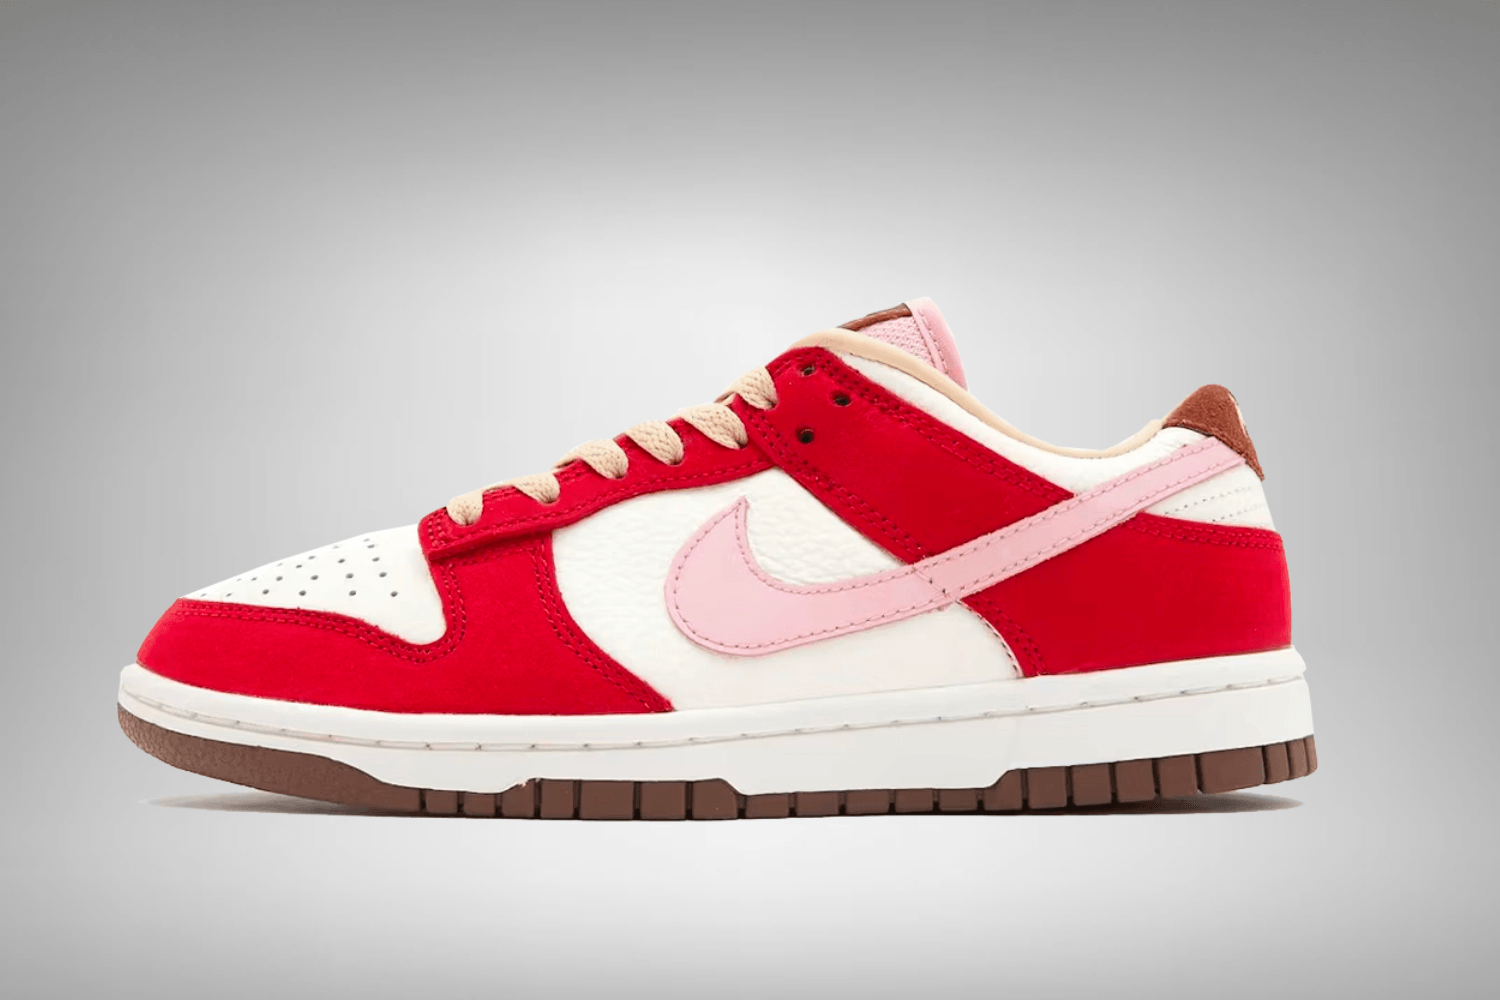 The 'Bacon' colorway is making a comeback on the Nike Dunk Low WMNS